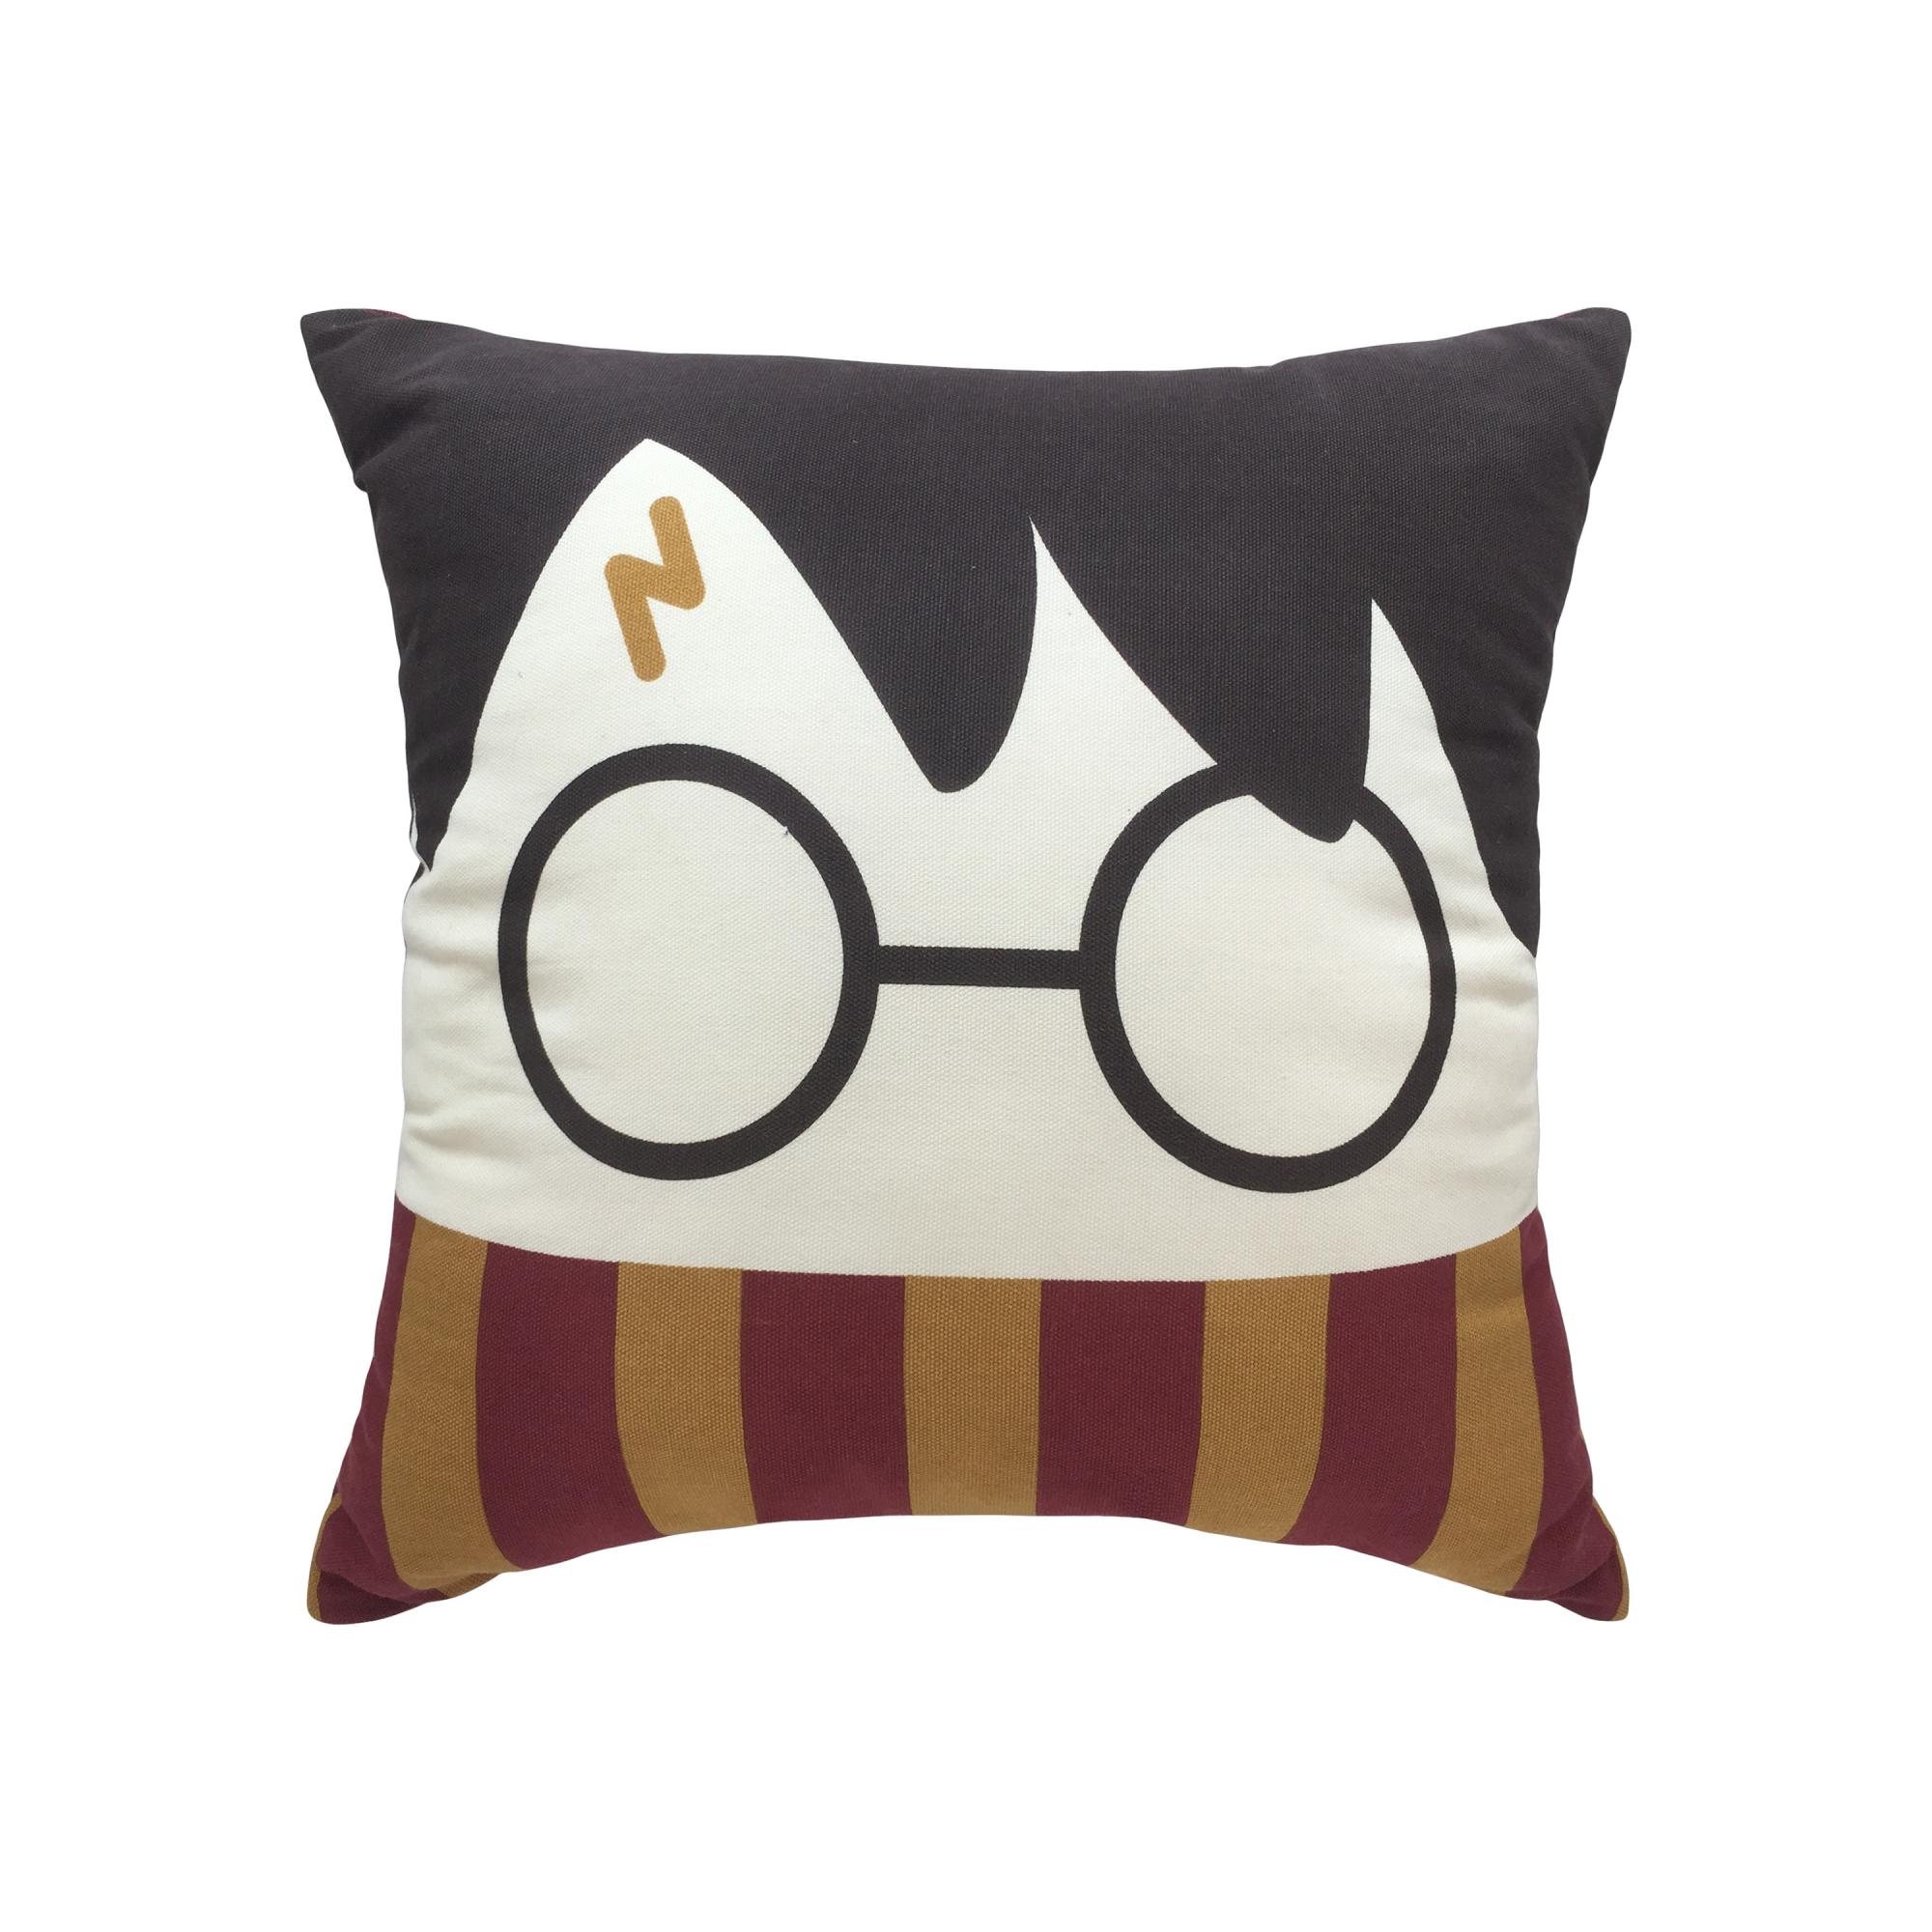 HARRY POTTER SCARS CUSHION COVER 40x40 Cm